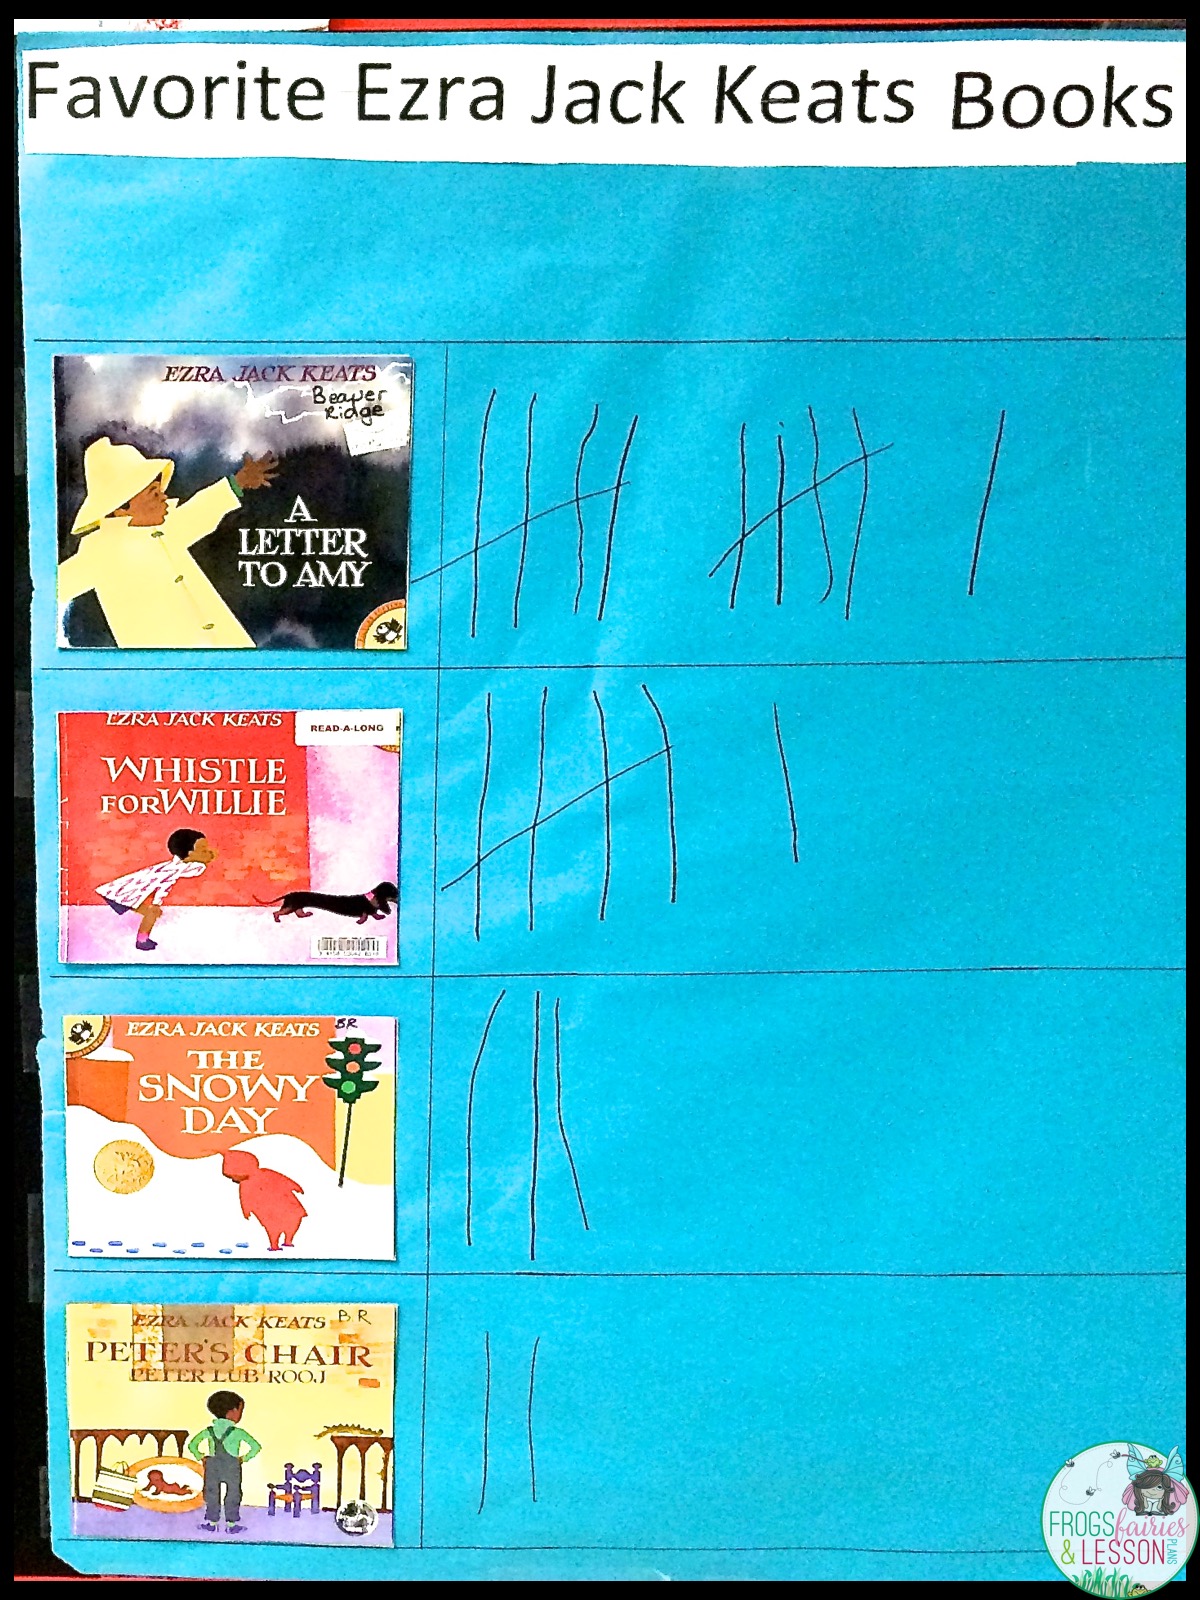 Tally Chart that students created for the graphing activity